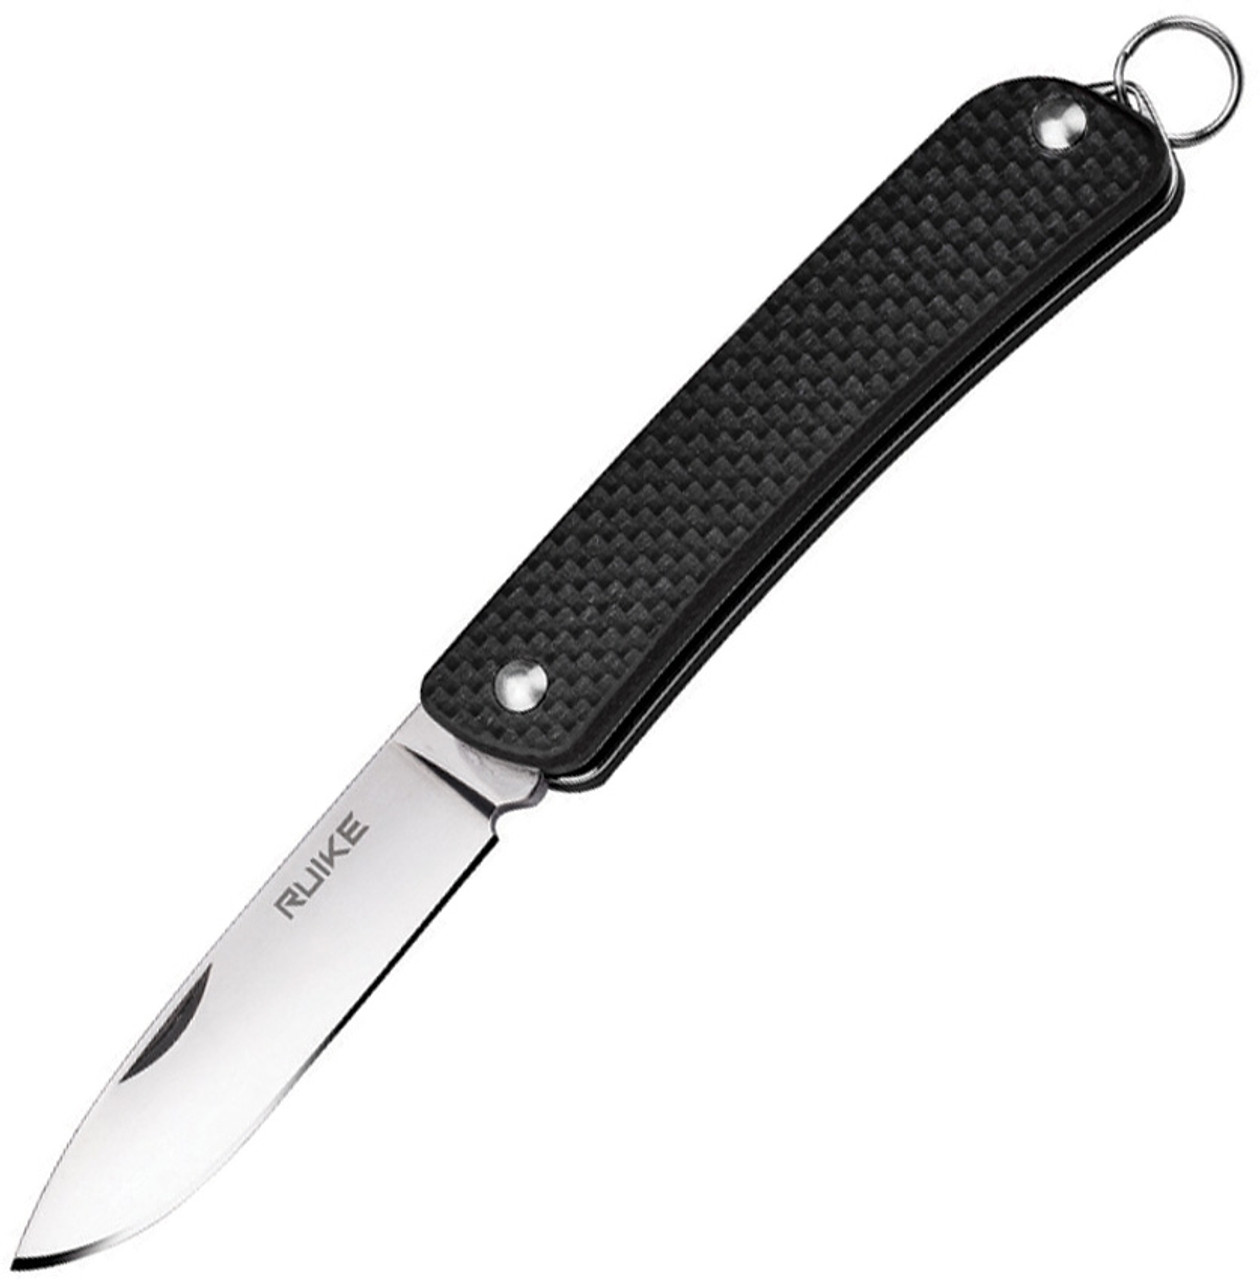 Ruike Criterion Collection S11B, 2.1" 12C27 Plain Blade, Black G-10 Handle